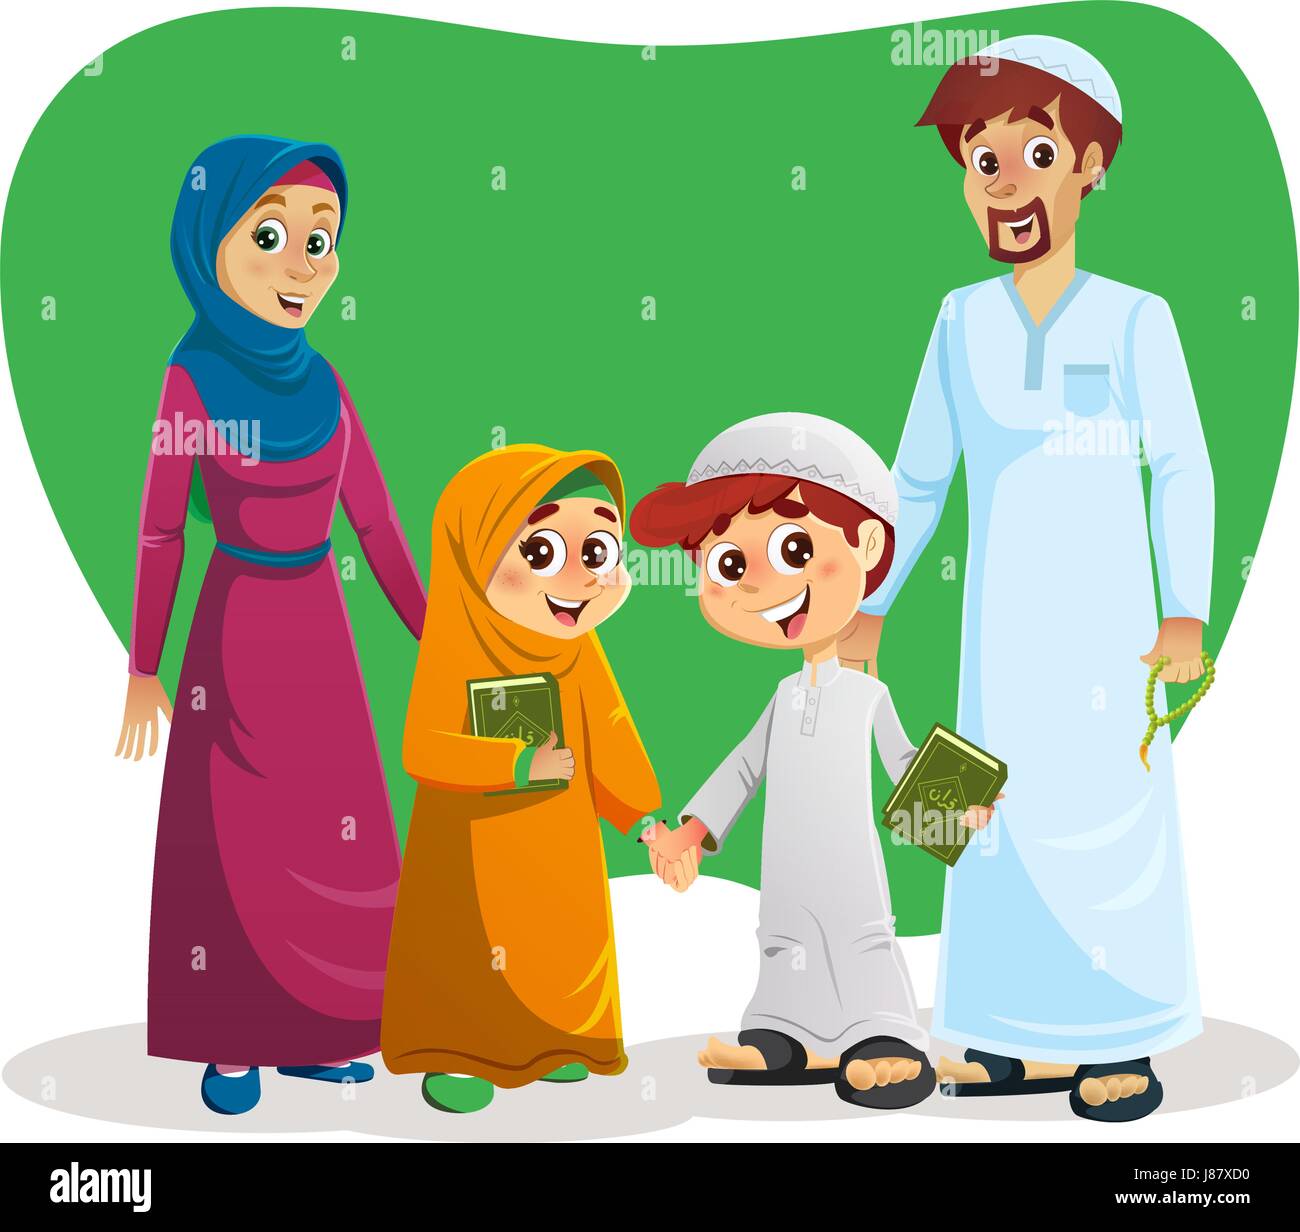 Happy Muslim Family with Kids Stock Vector Art ...